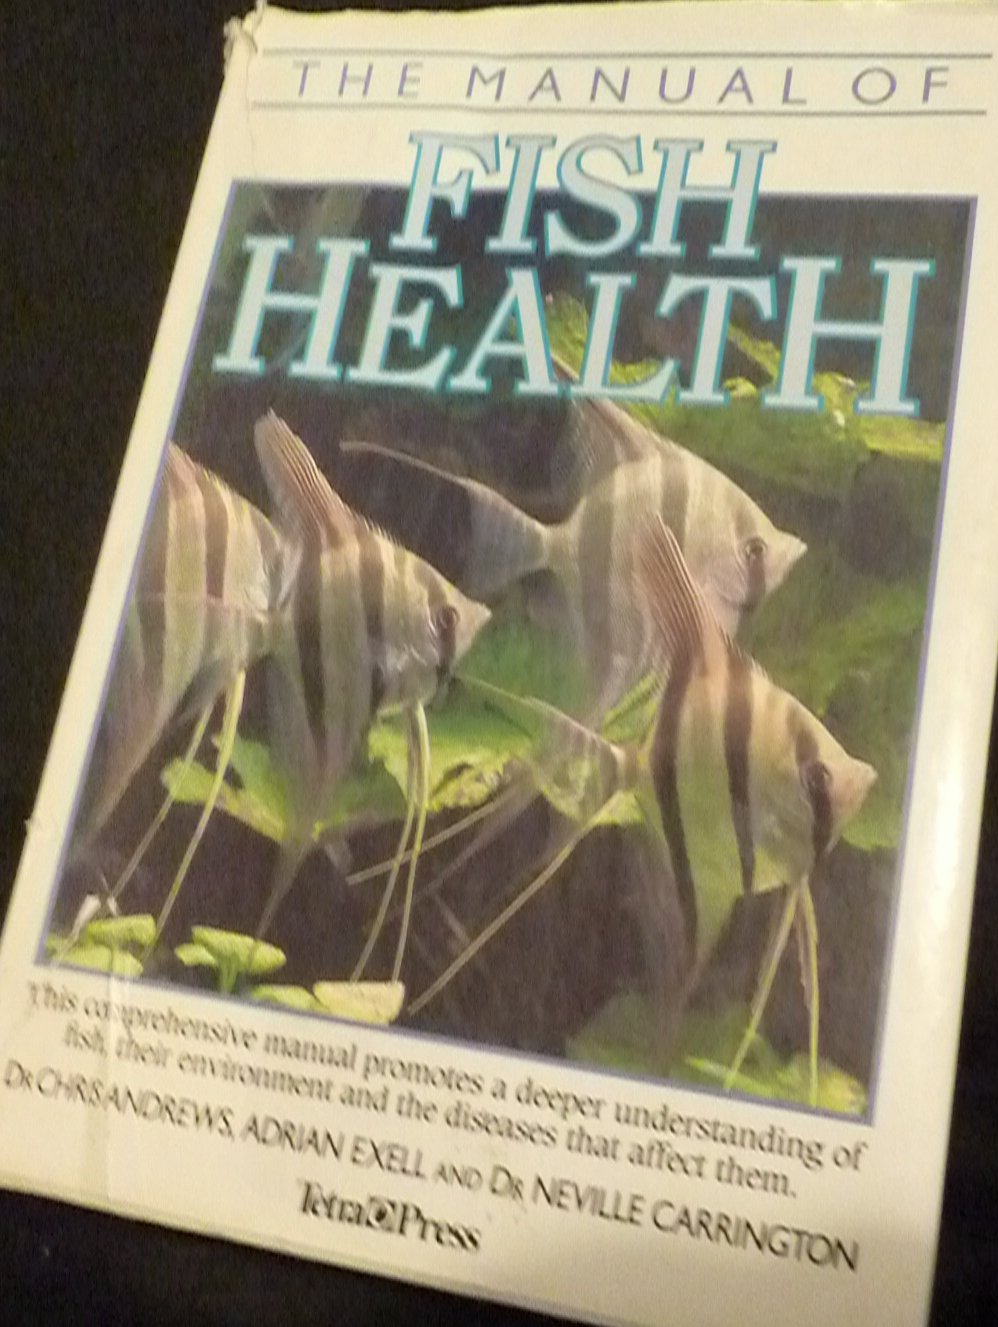 The Manual of Fish Health - Dr. Chris Andrews-Adrian Exell-Dr. Neville Carrington